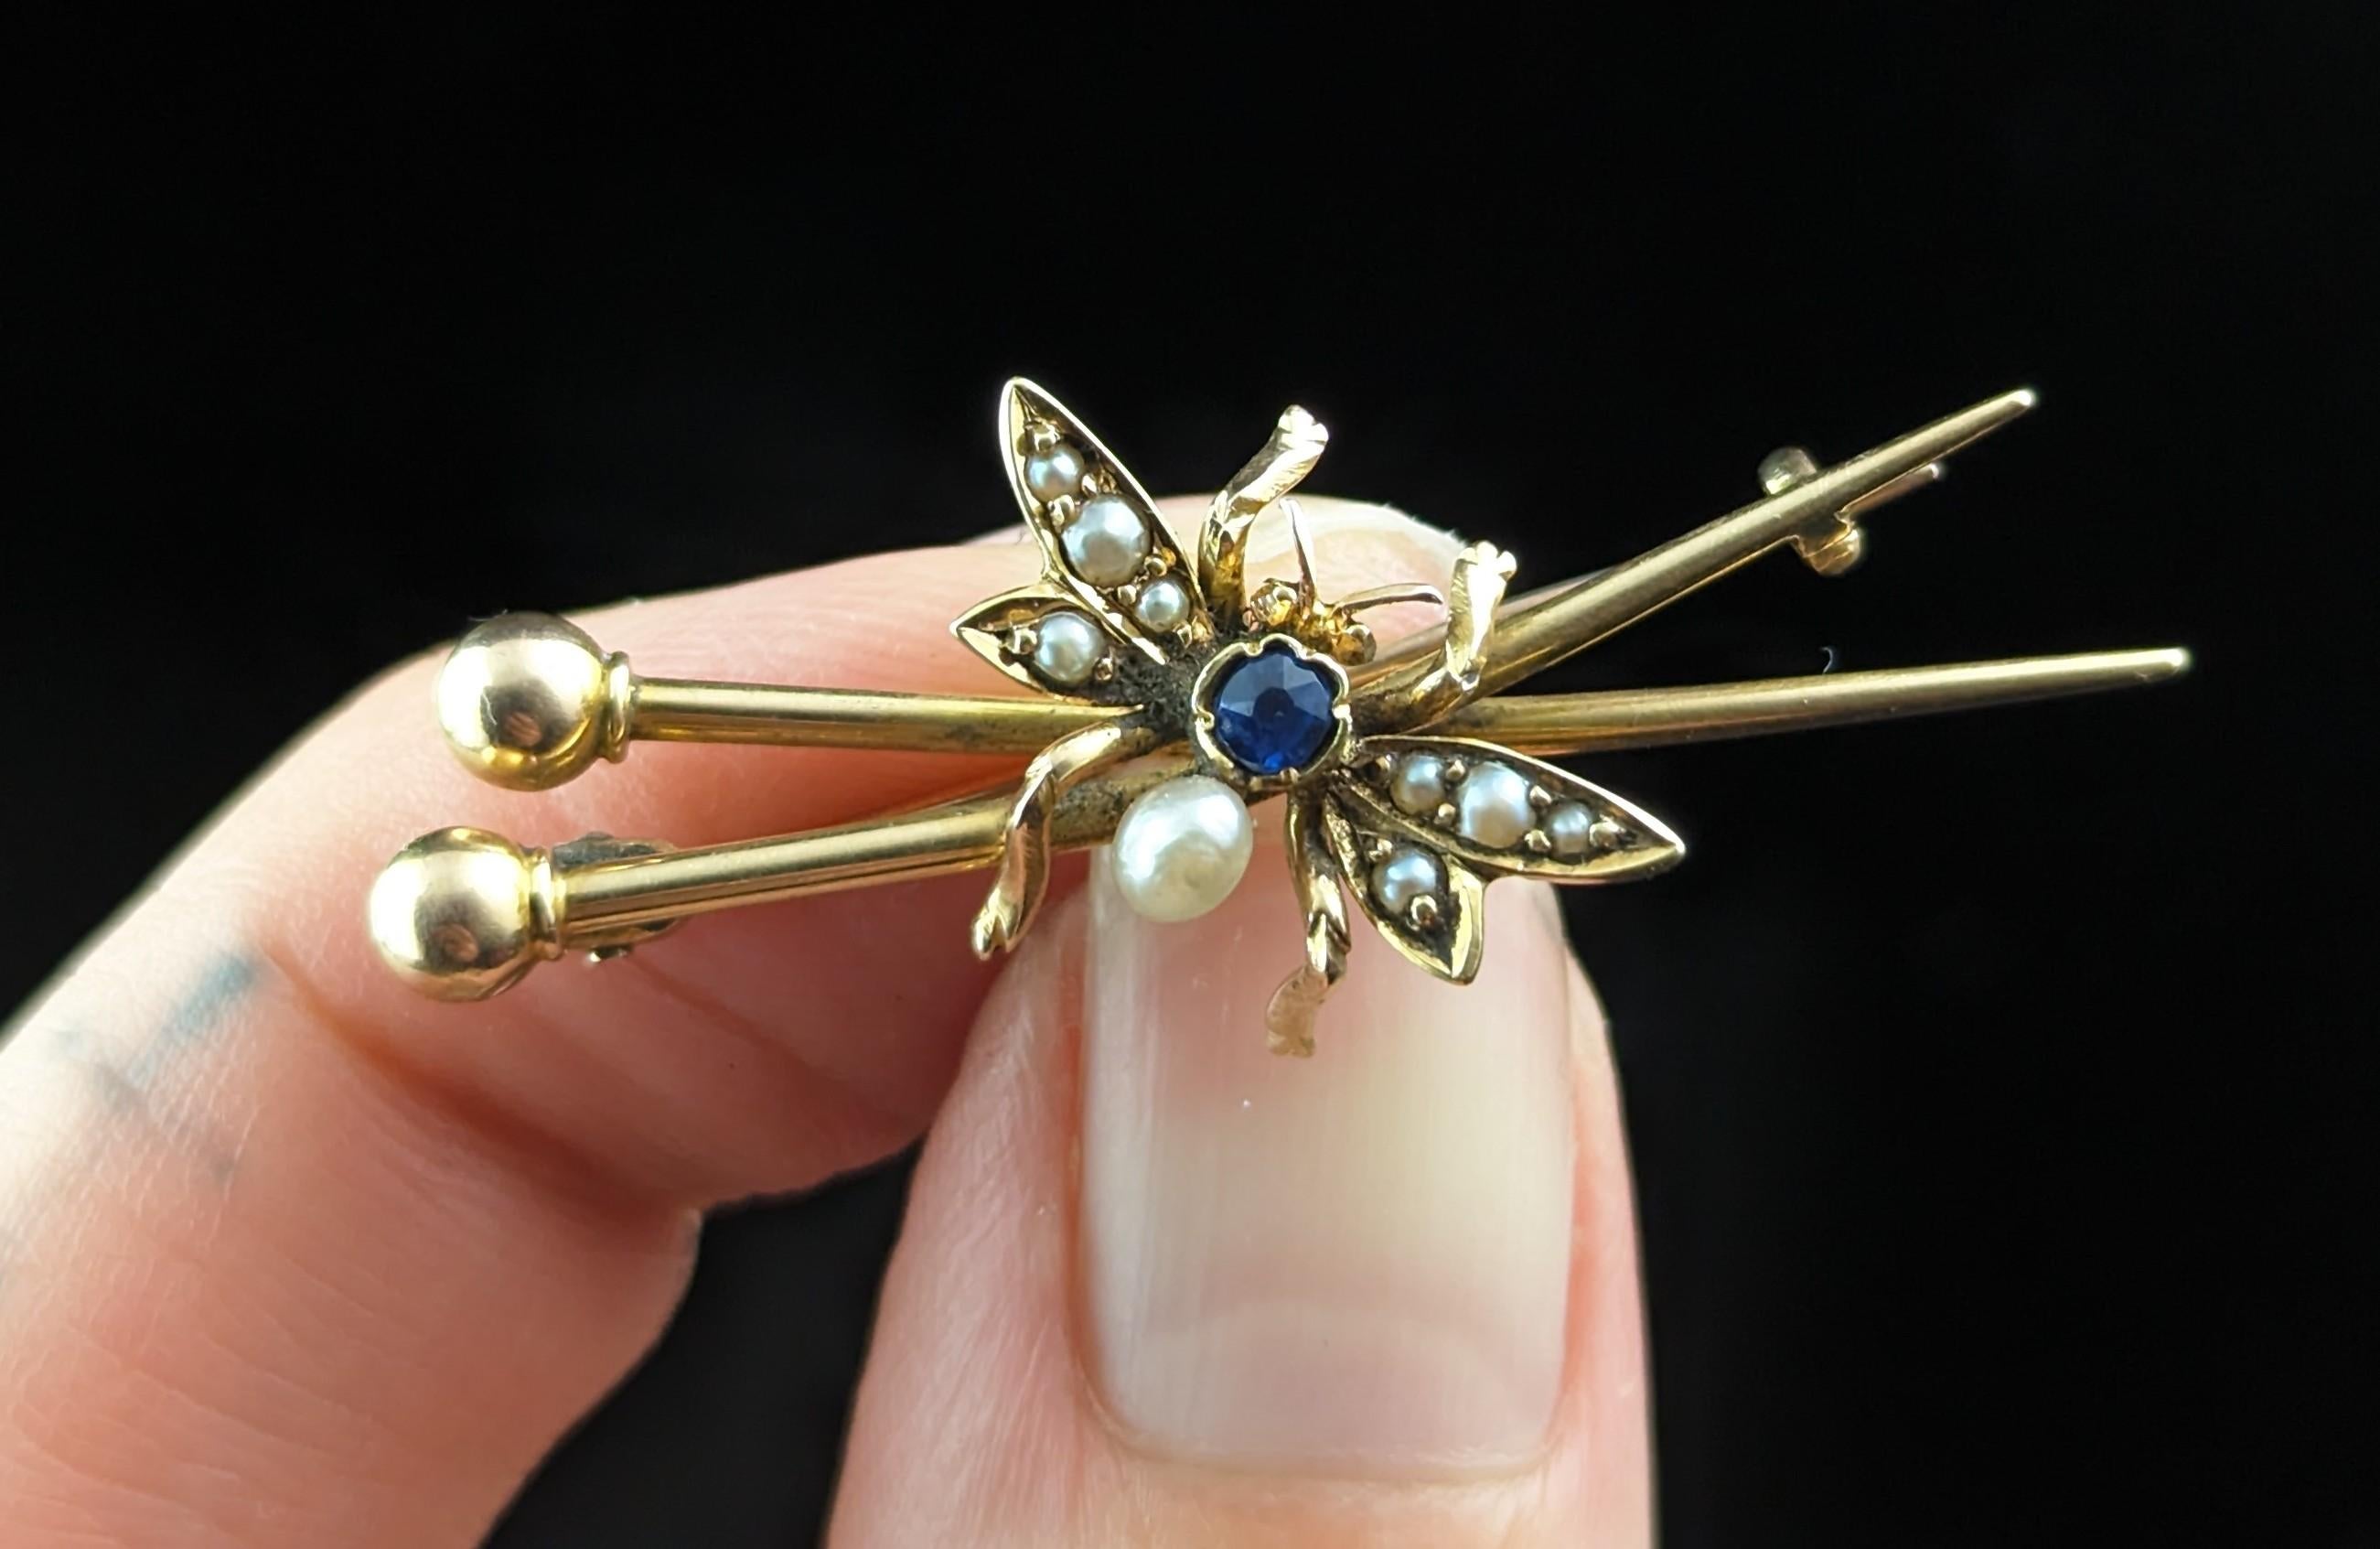 An alluring and unusual antique fly brooch!

This brooch features a fly sitting upon a pair of crossed knitting needles, the fly is adorned with creamy seed pearls and has a single round cut sapphire to the body.

An old wives tale says that it is